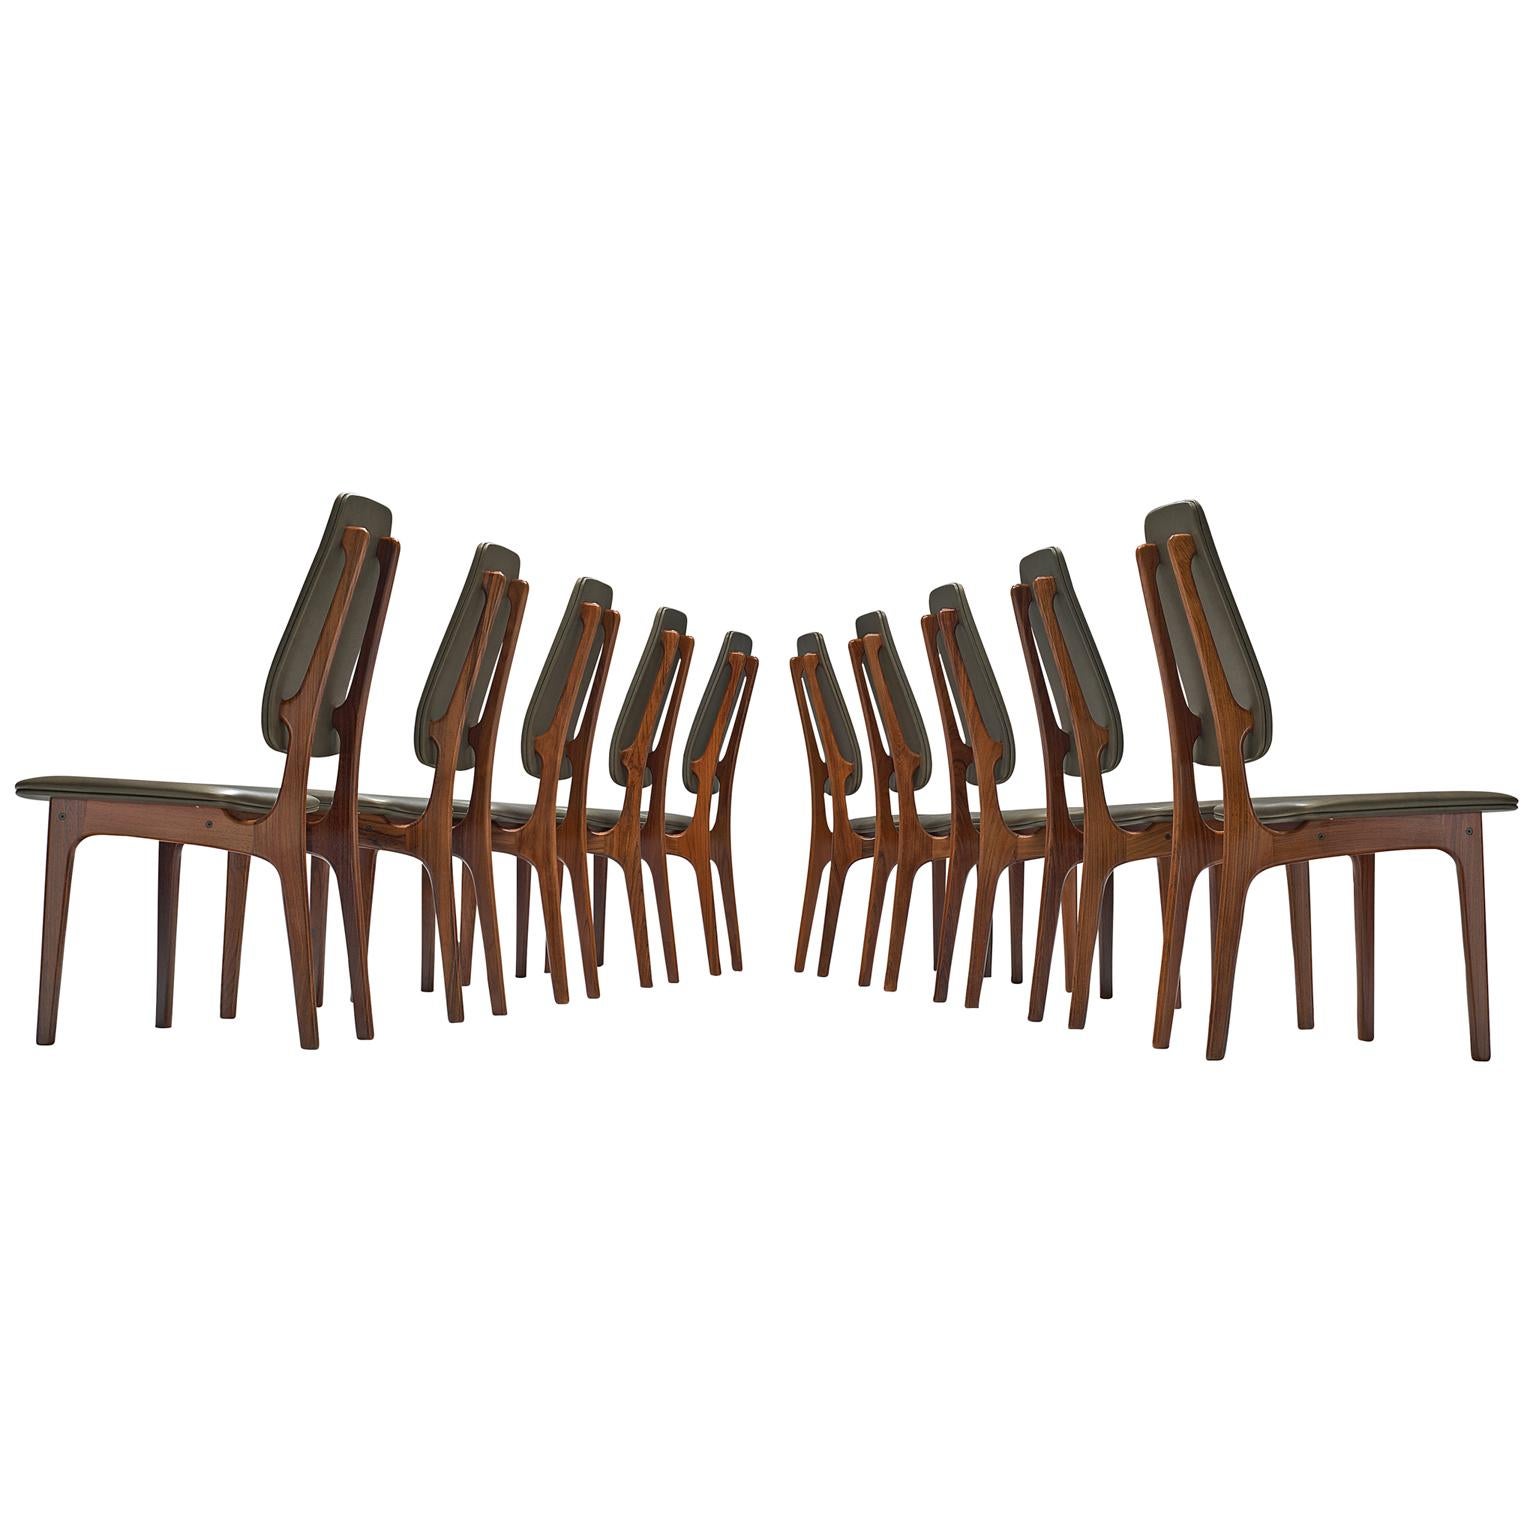 Deep Green Leather and Rosewood Set of Ten Chairs by Vestergaard Jensen